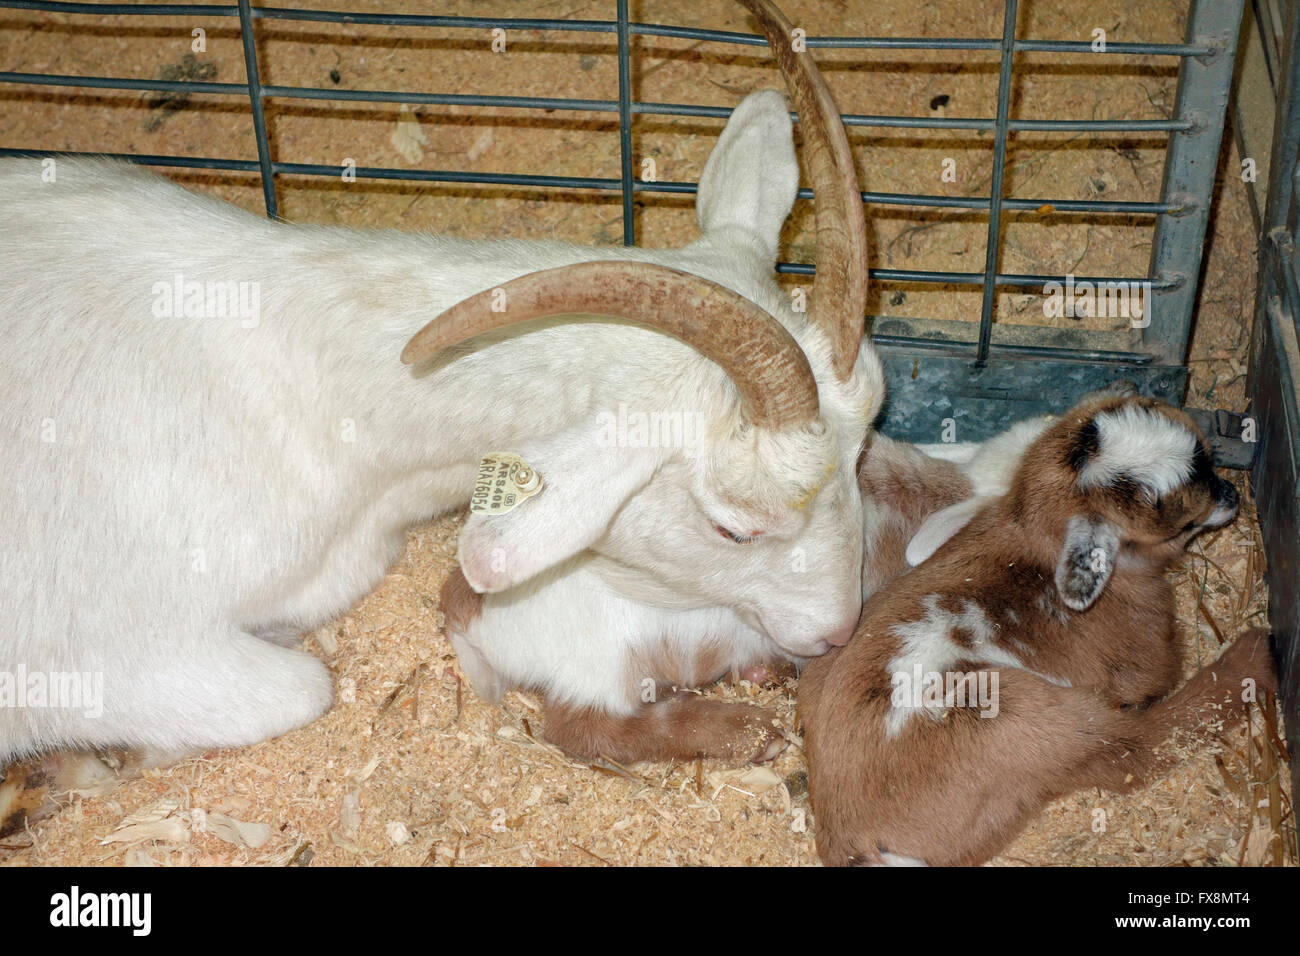 A goat tending to babies Stock Photo